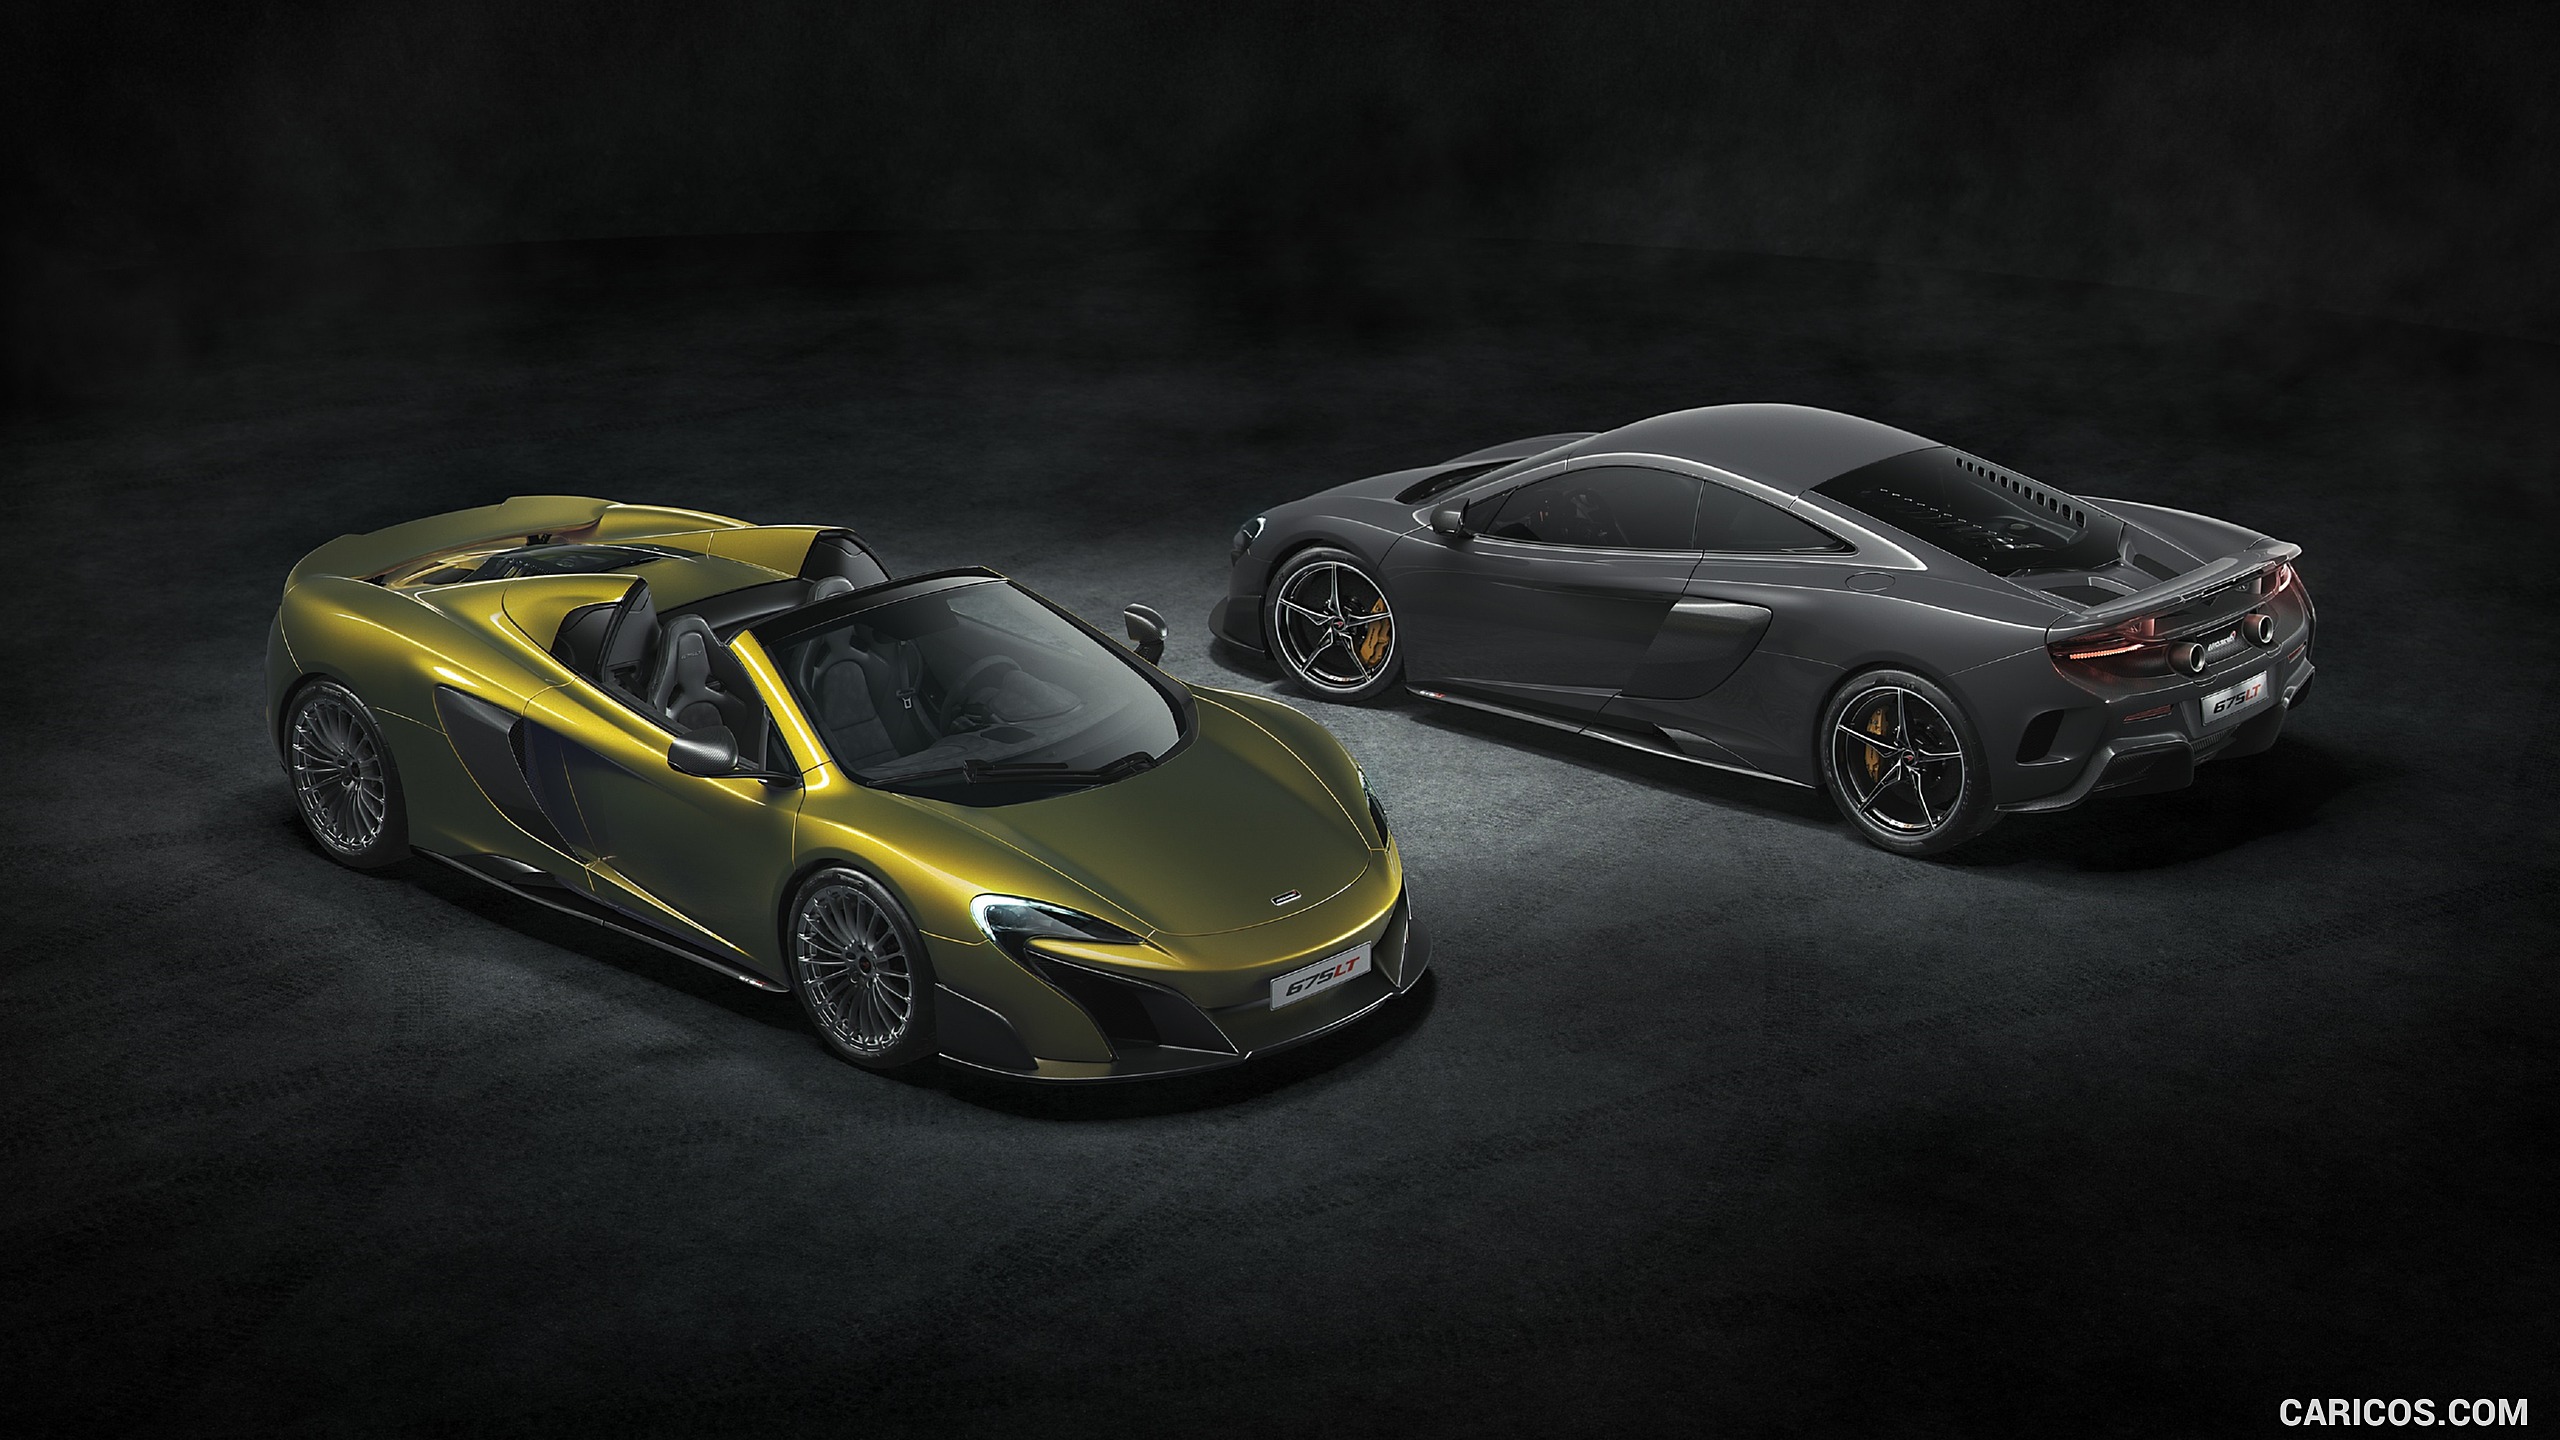 2017 McLaren 675LT Spider and Coupe - Front, #5 of 60